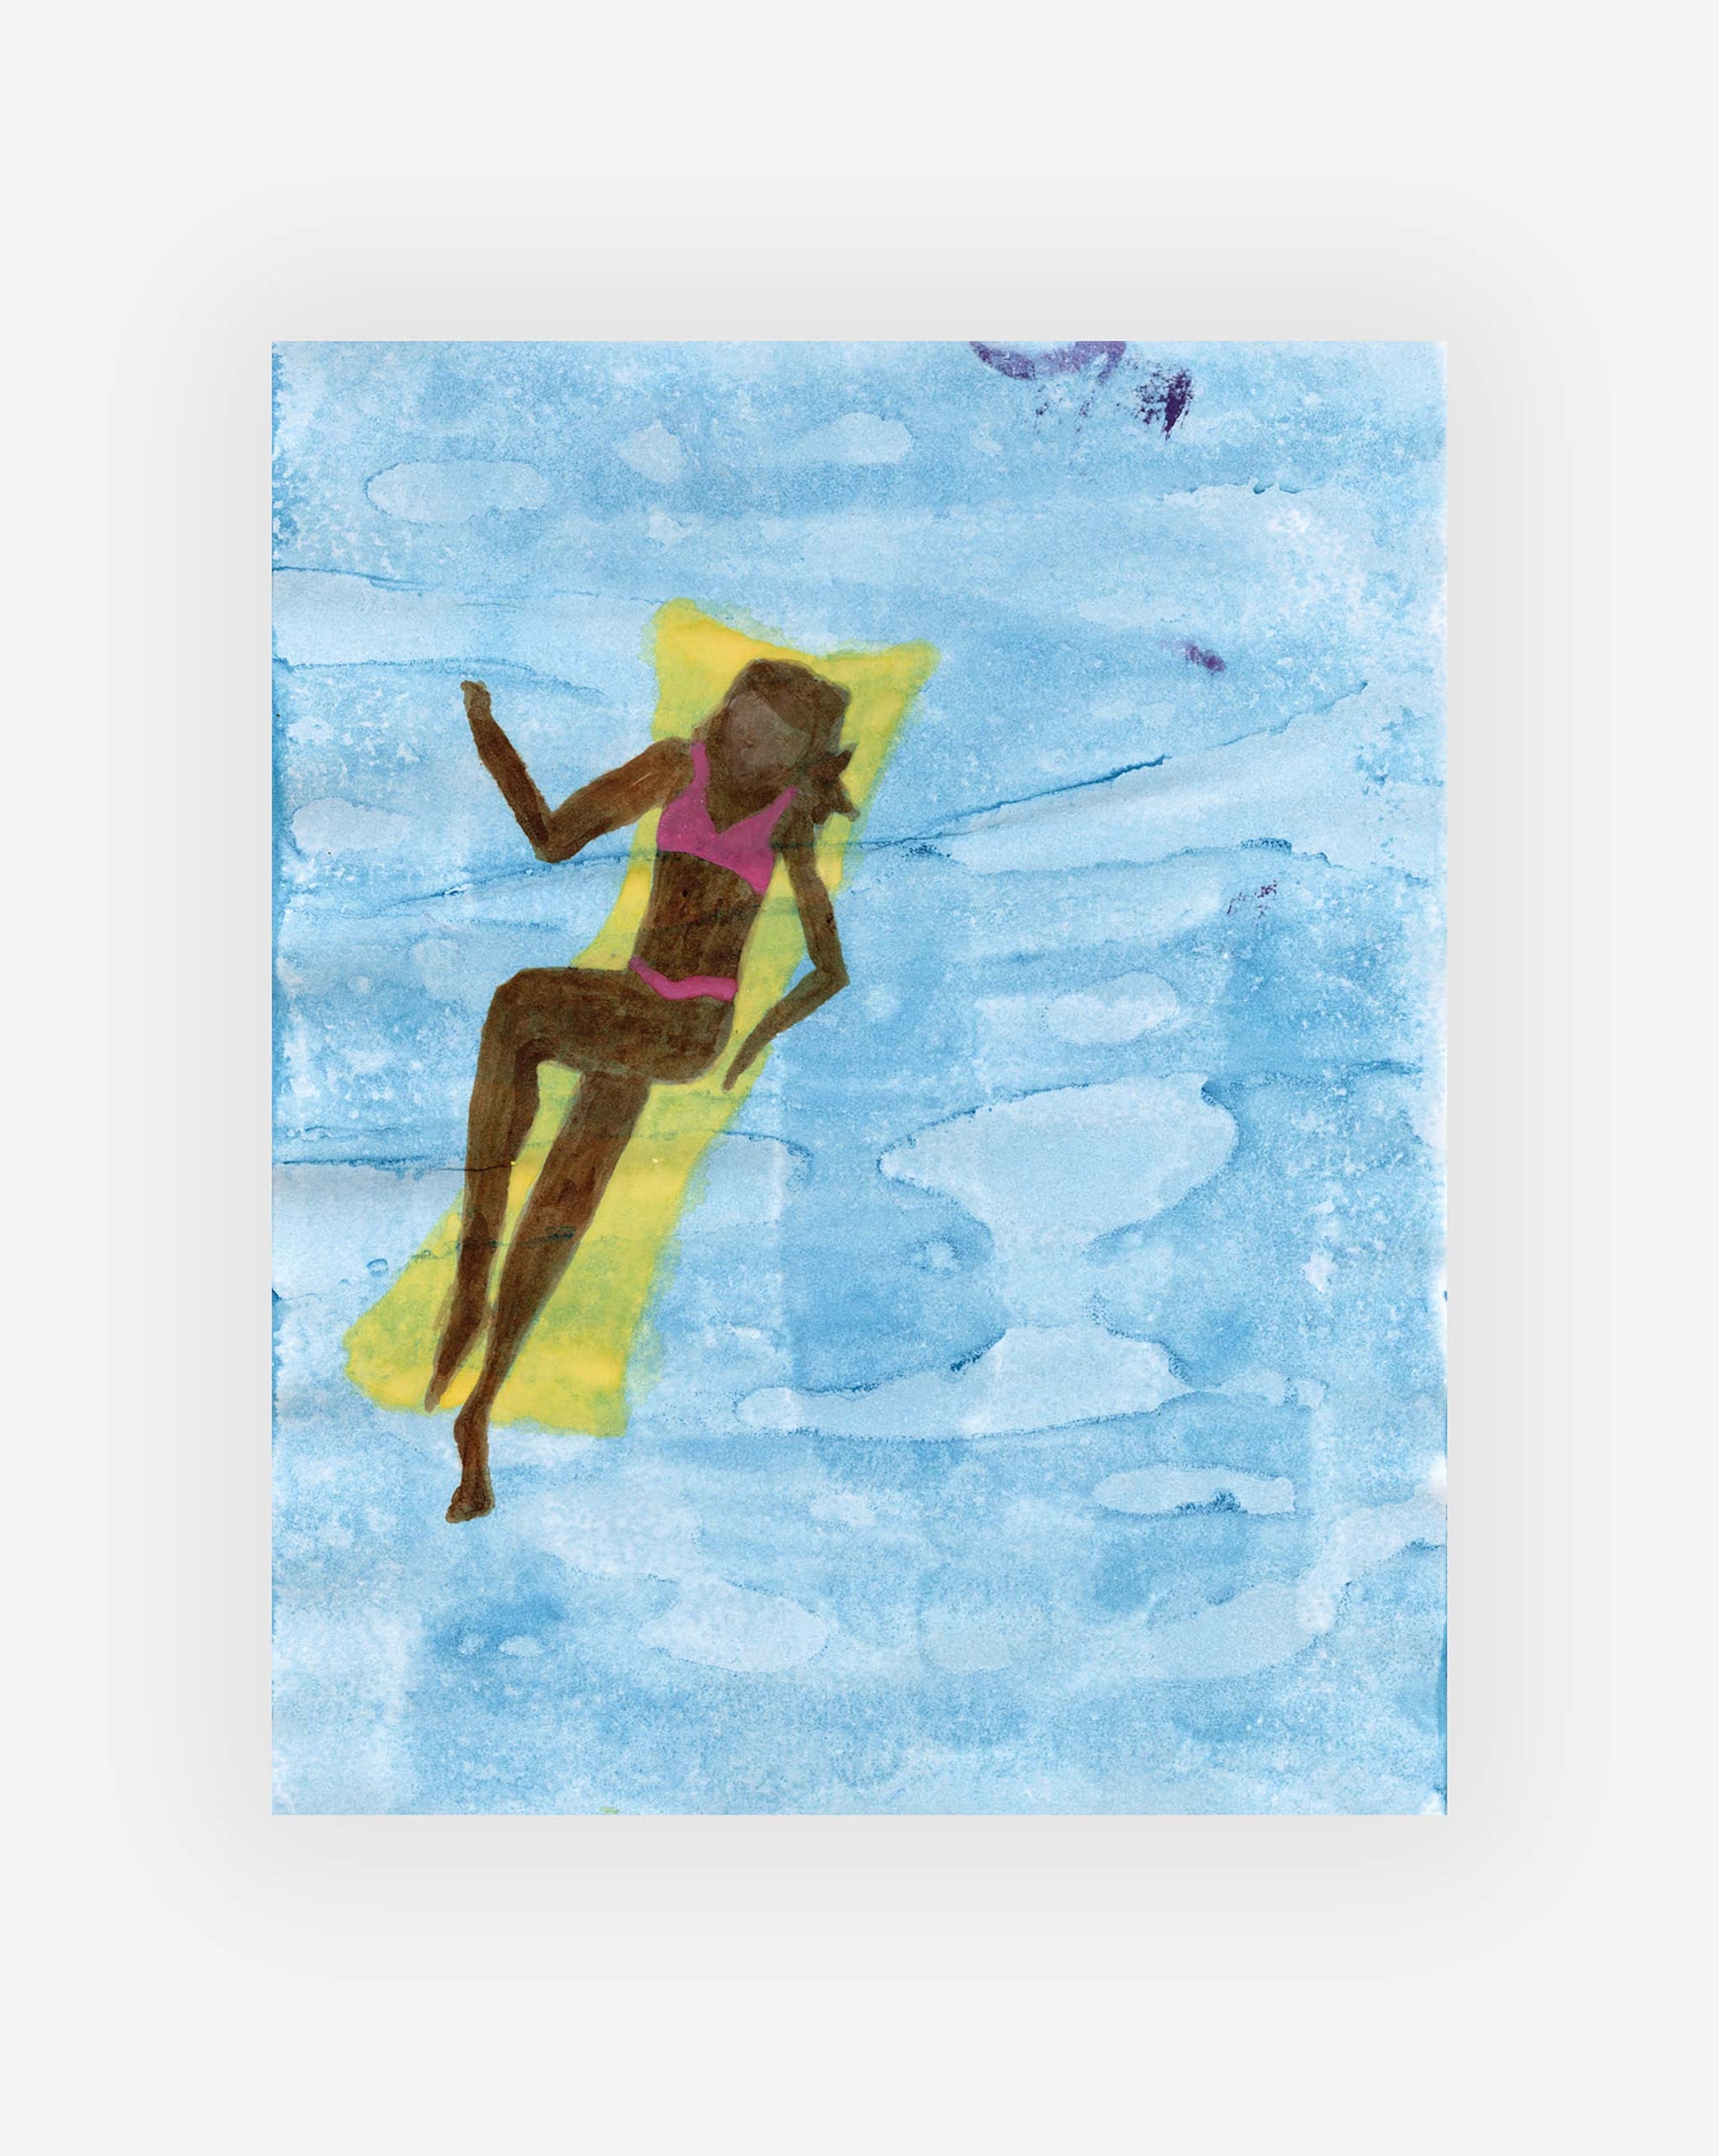 Person floating on a Yellow Raft Print in a blue body of water, wearing a pink swimsuit, reminiscent of an Eskayel design by artist Shanan Campanaro.